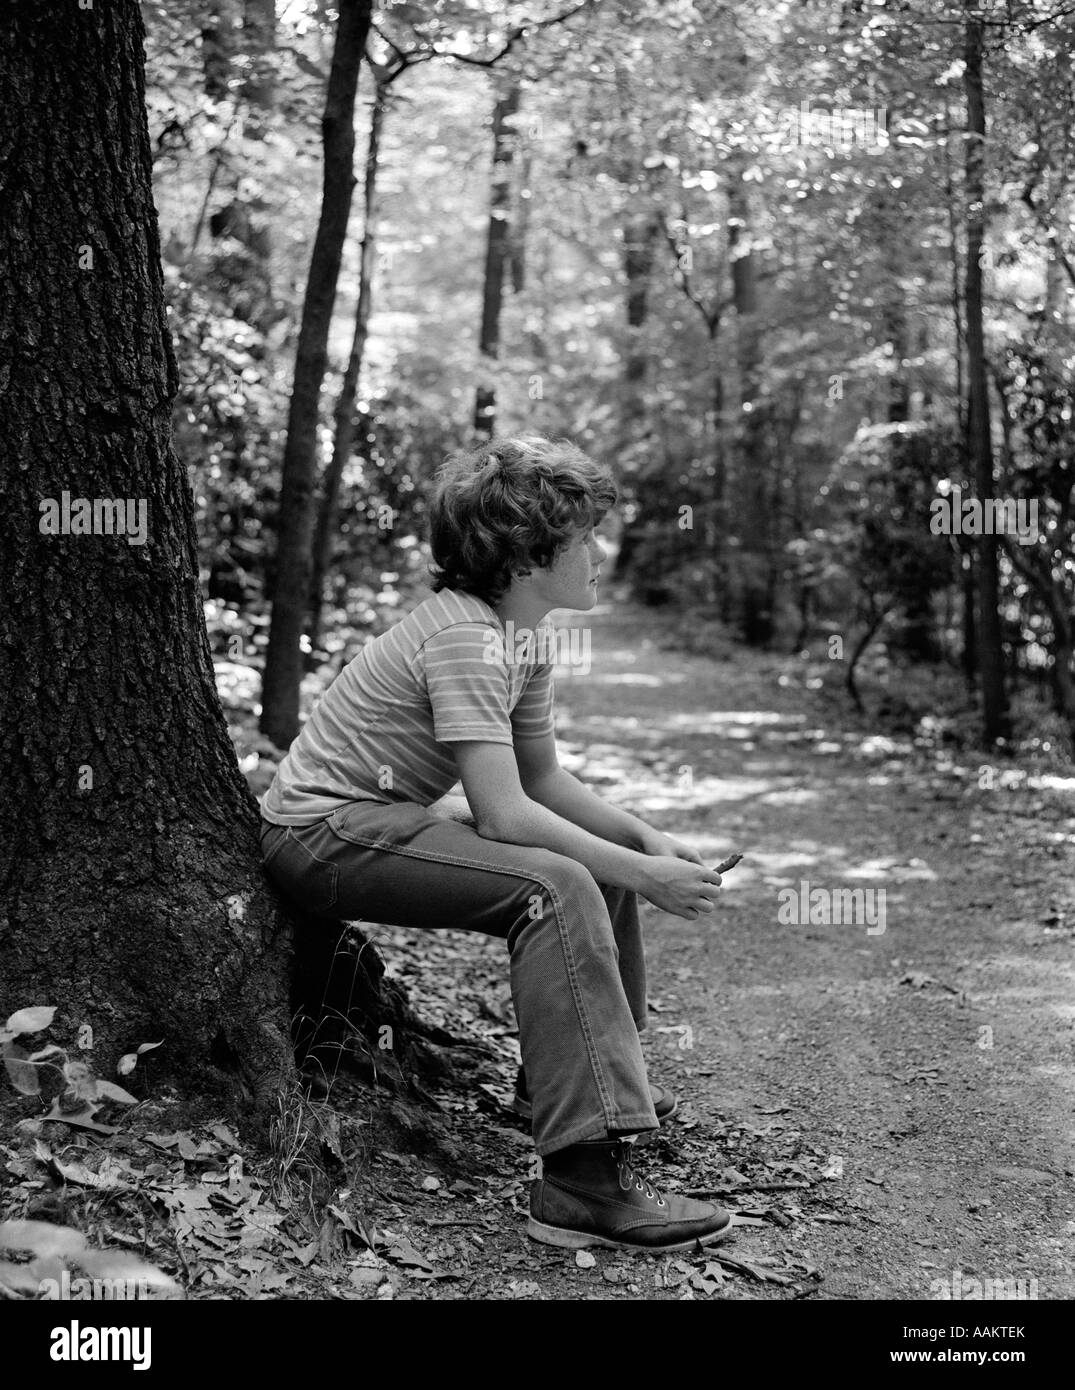 1970s SIDE VIEW OF BOY SITTING AT FOOT OF TREE ALONG TRAIL IN WOODS Stock Photo